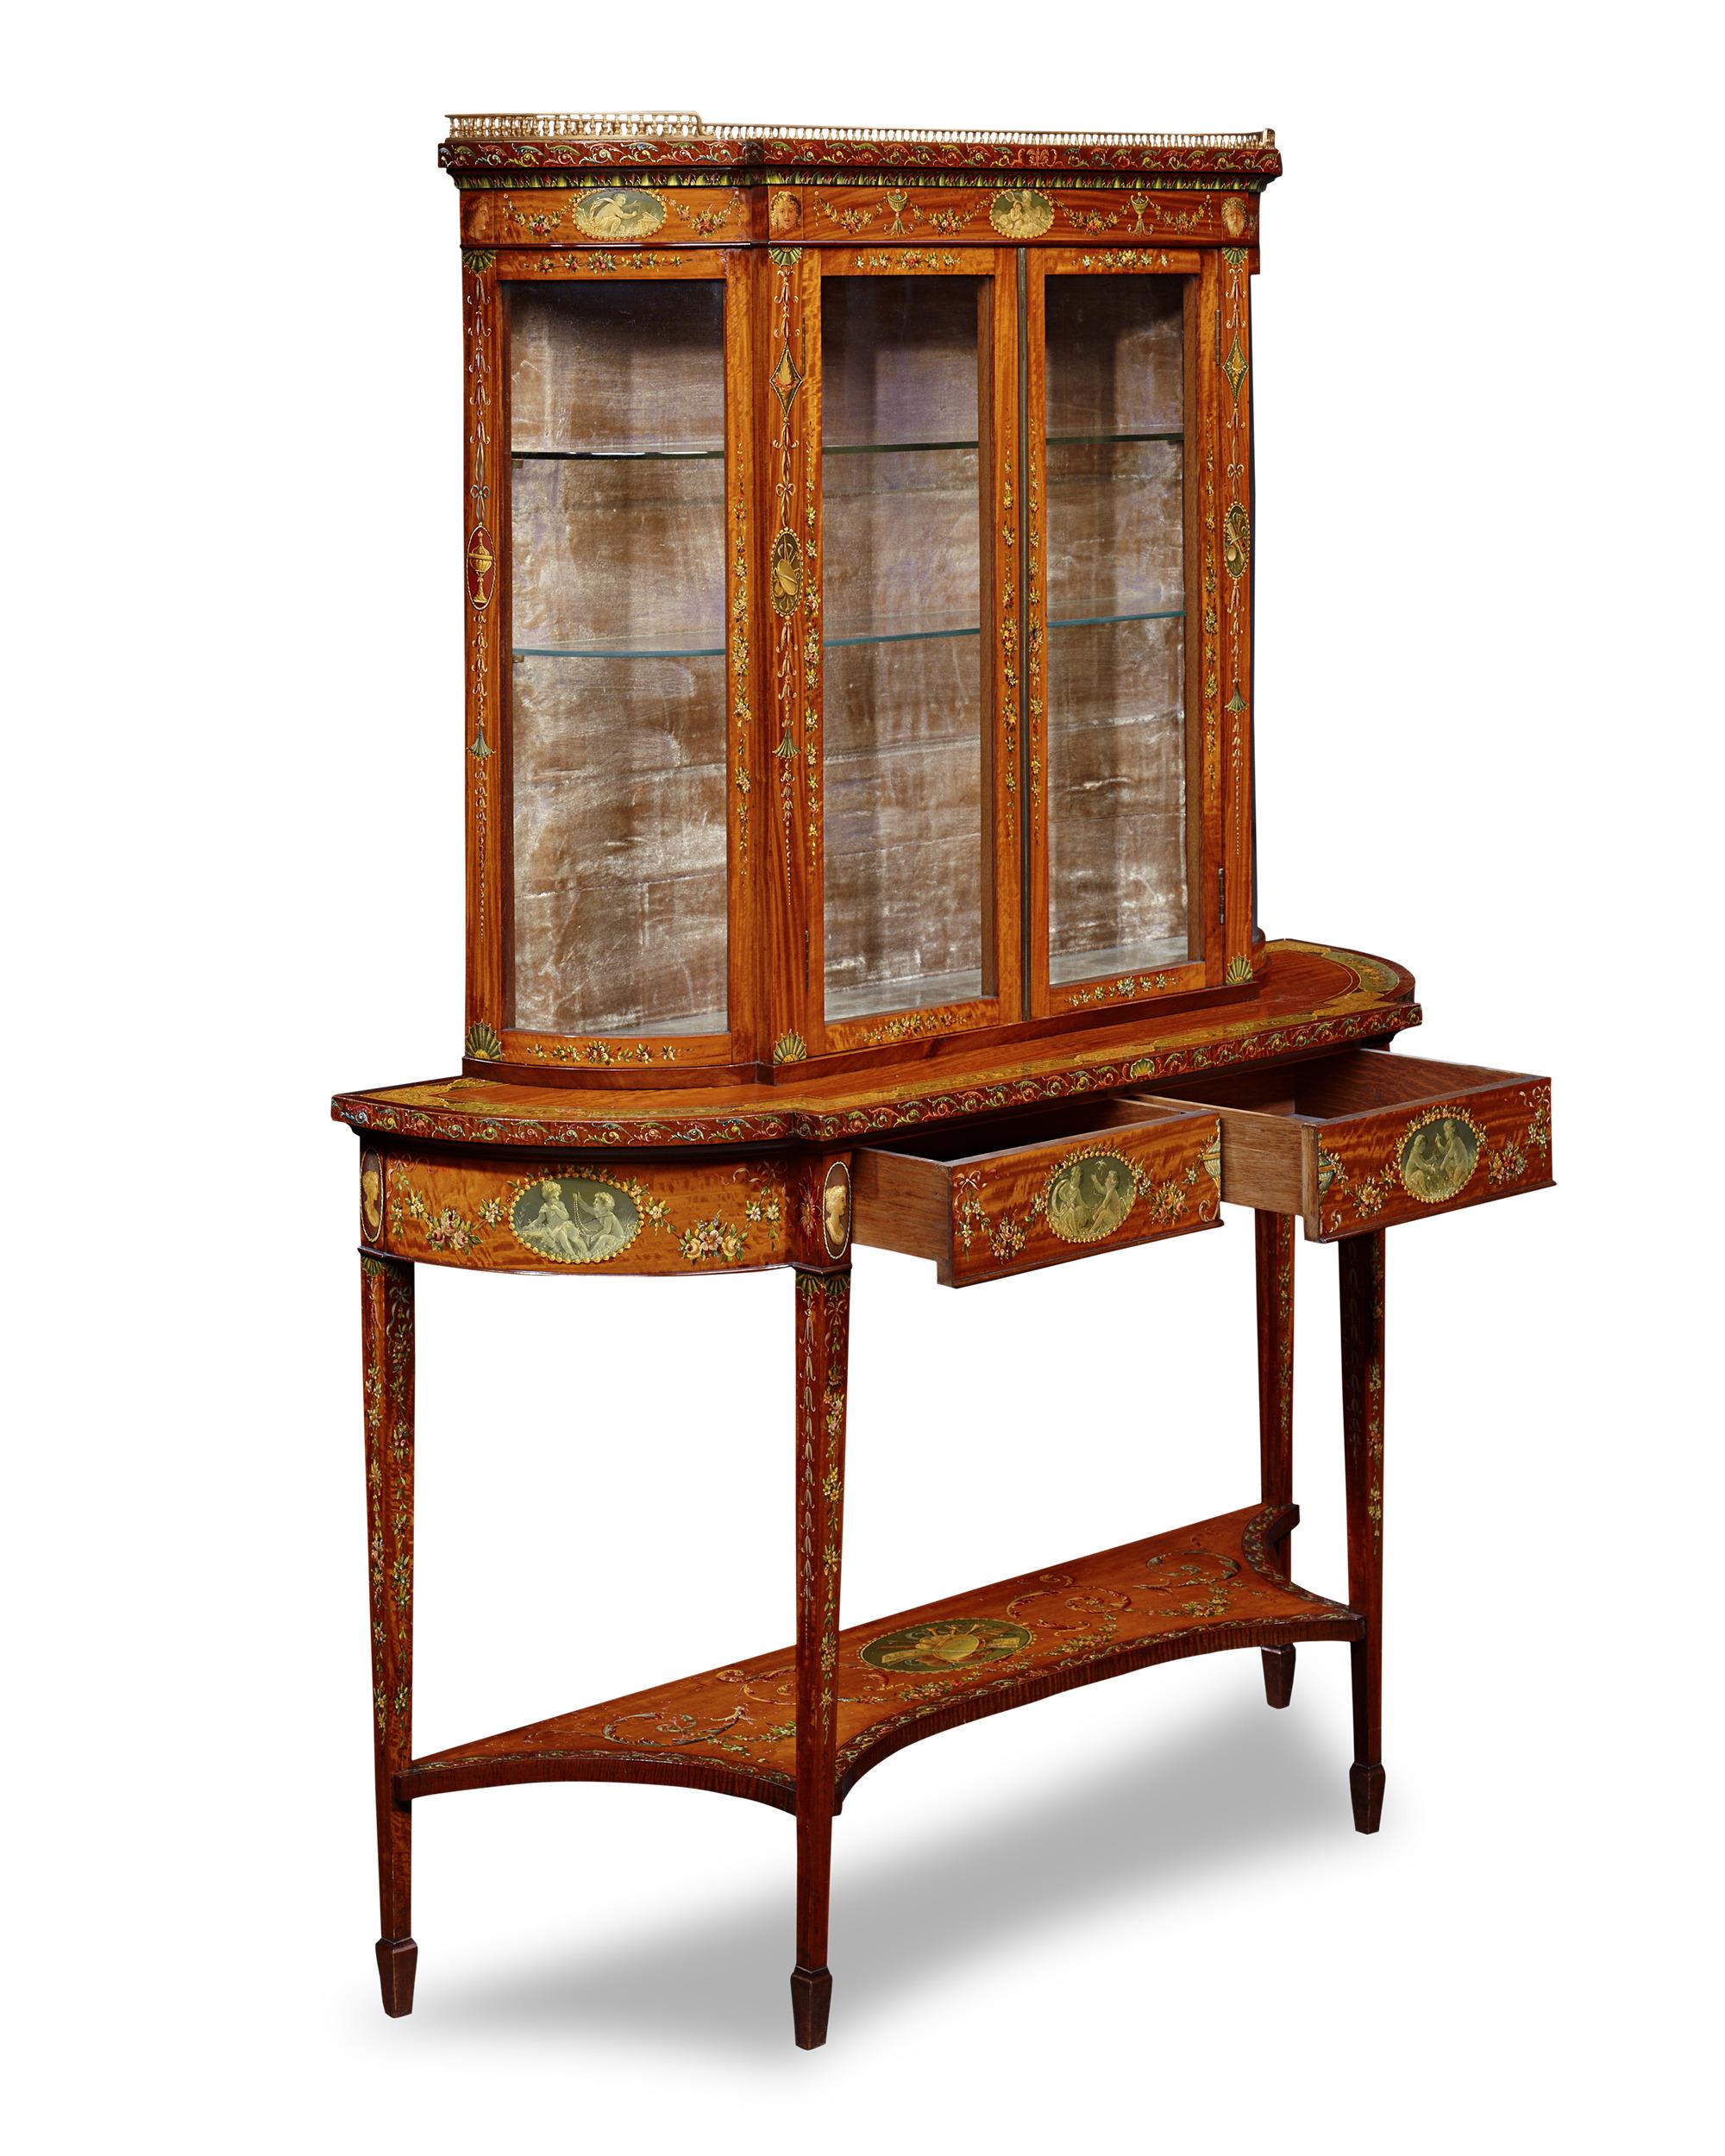 English Sheraton Revival Hand-Painted Vitrine For Sale